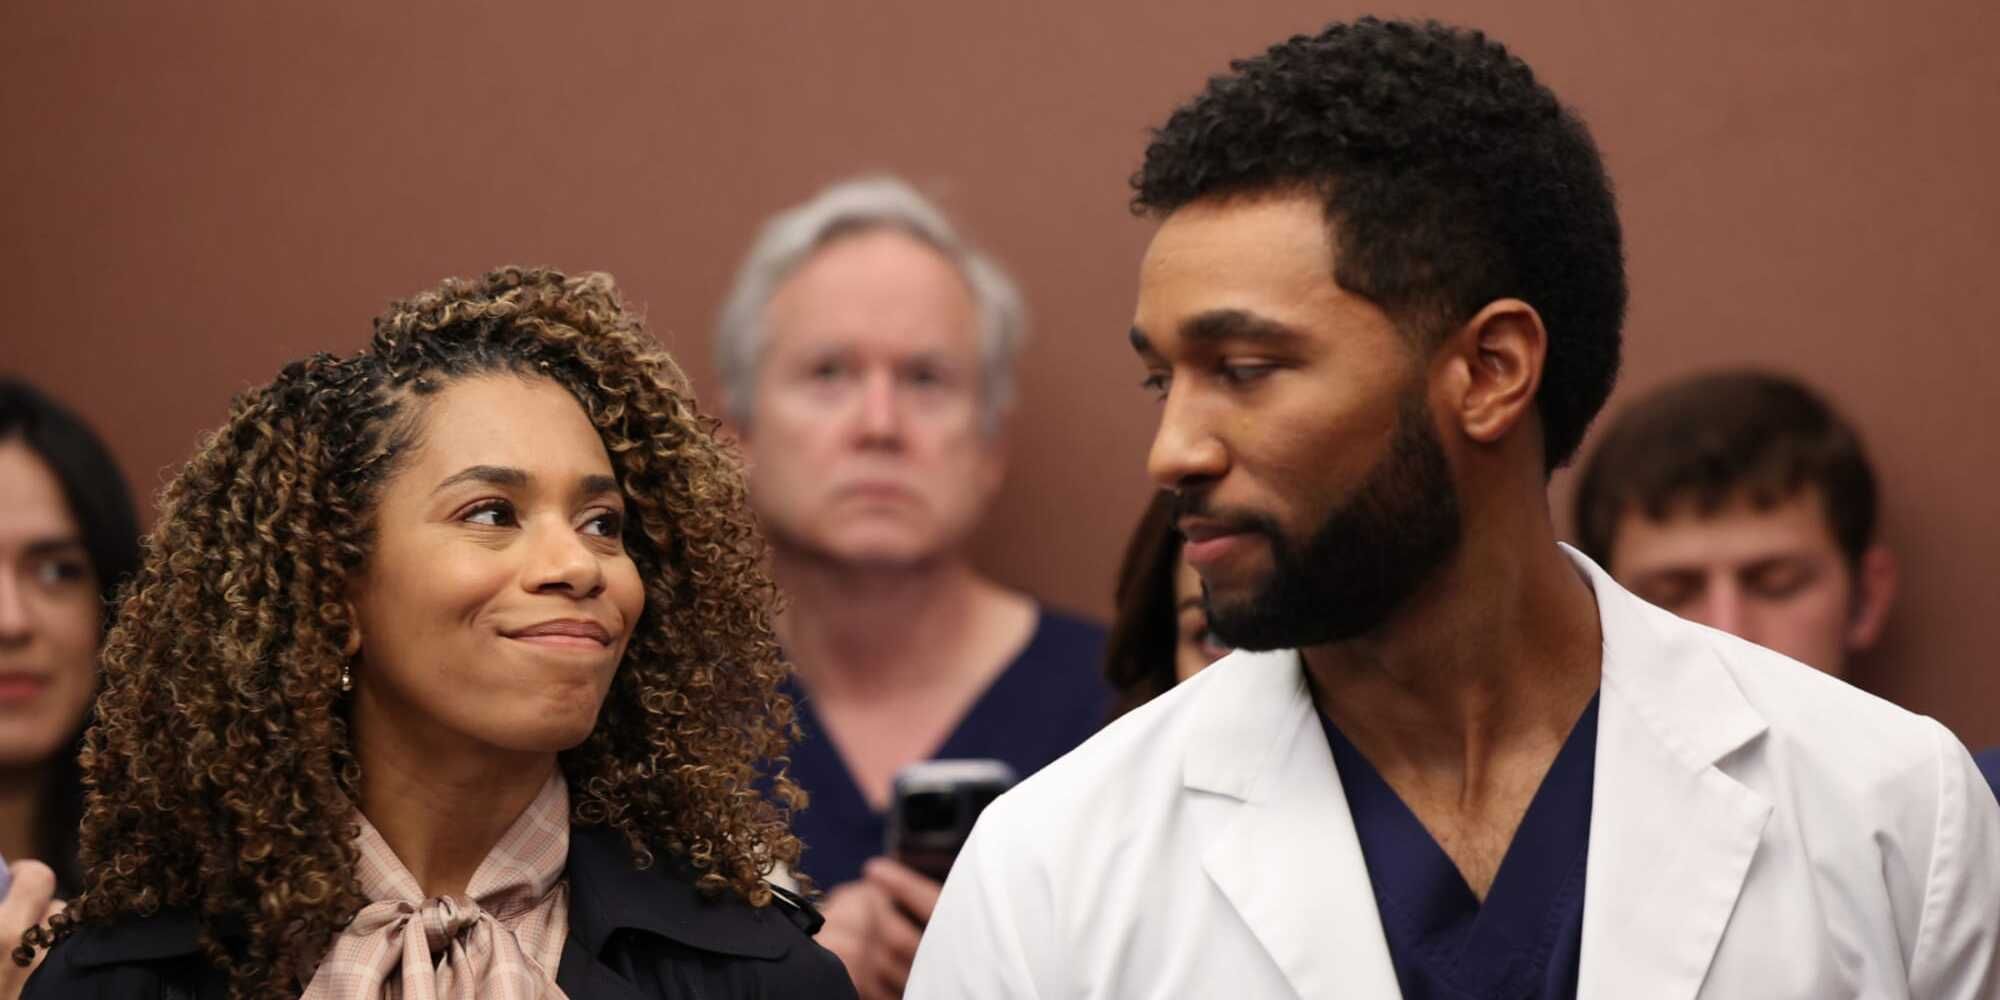 Kelly McCreary As Maggie & Anthony Hill As Winston In Grey's Anatomy.jpg